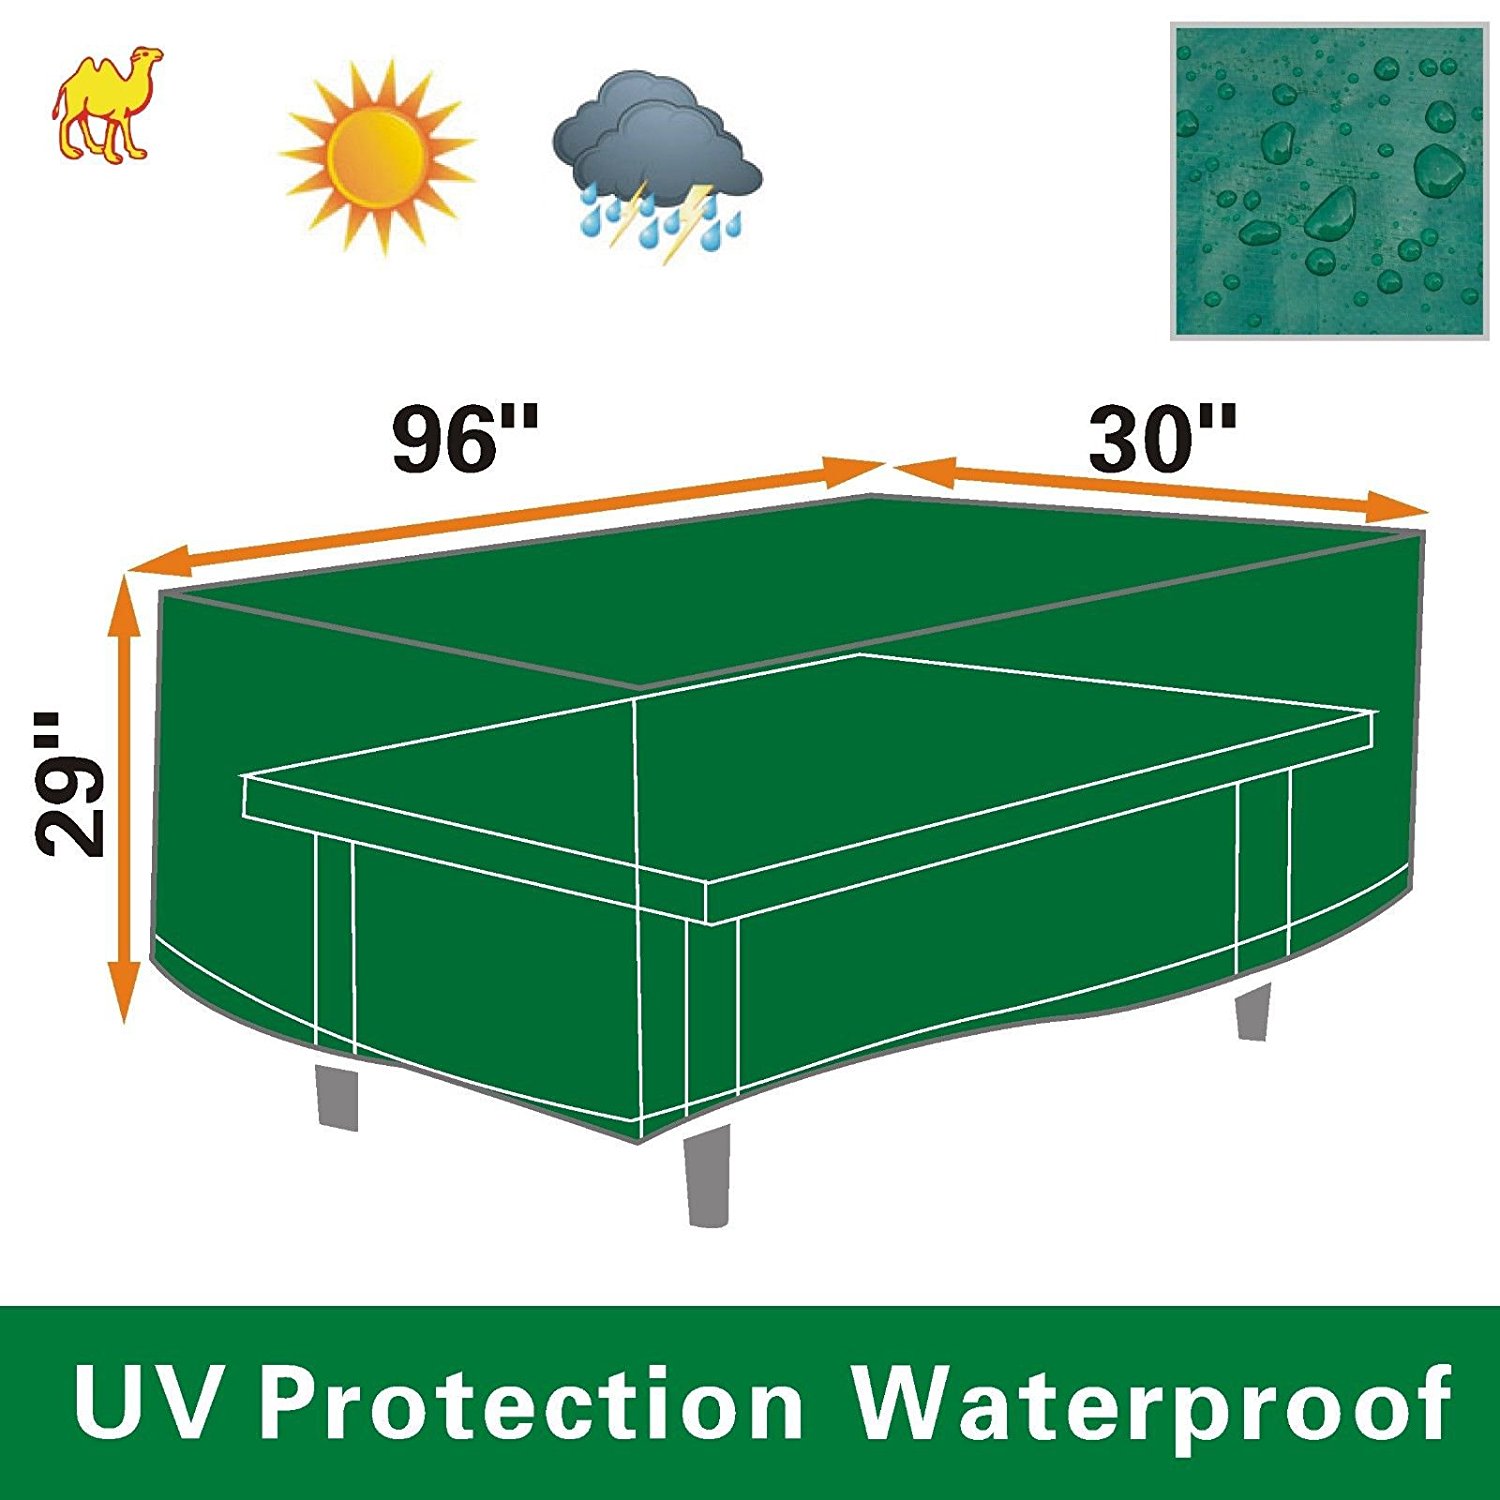 Strong Camel 8' Furniture Set Cover Patio Winter Table Protective Protector Garden Outdoor Green COLOR - image 1 of 1